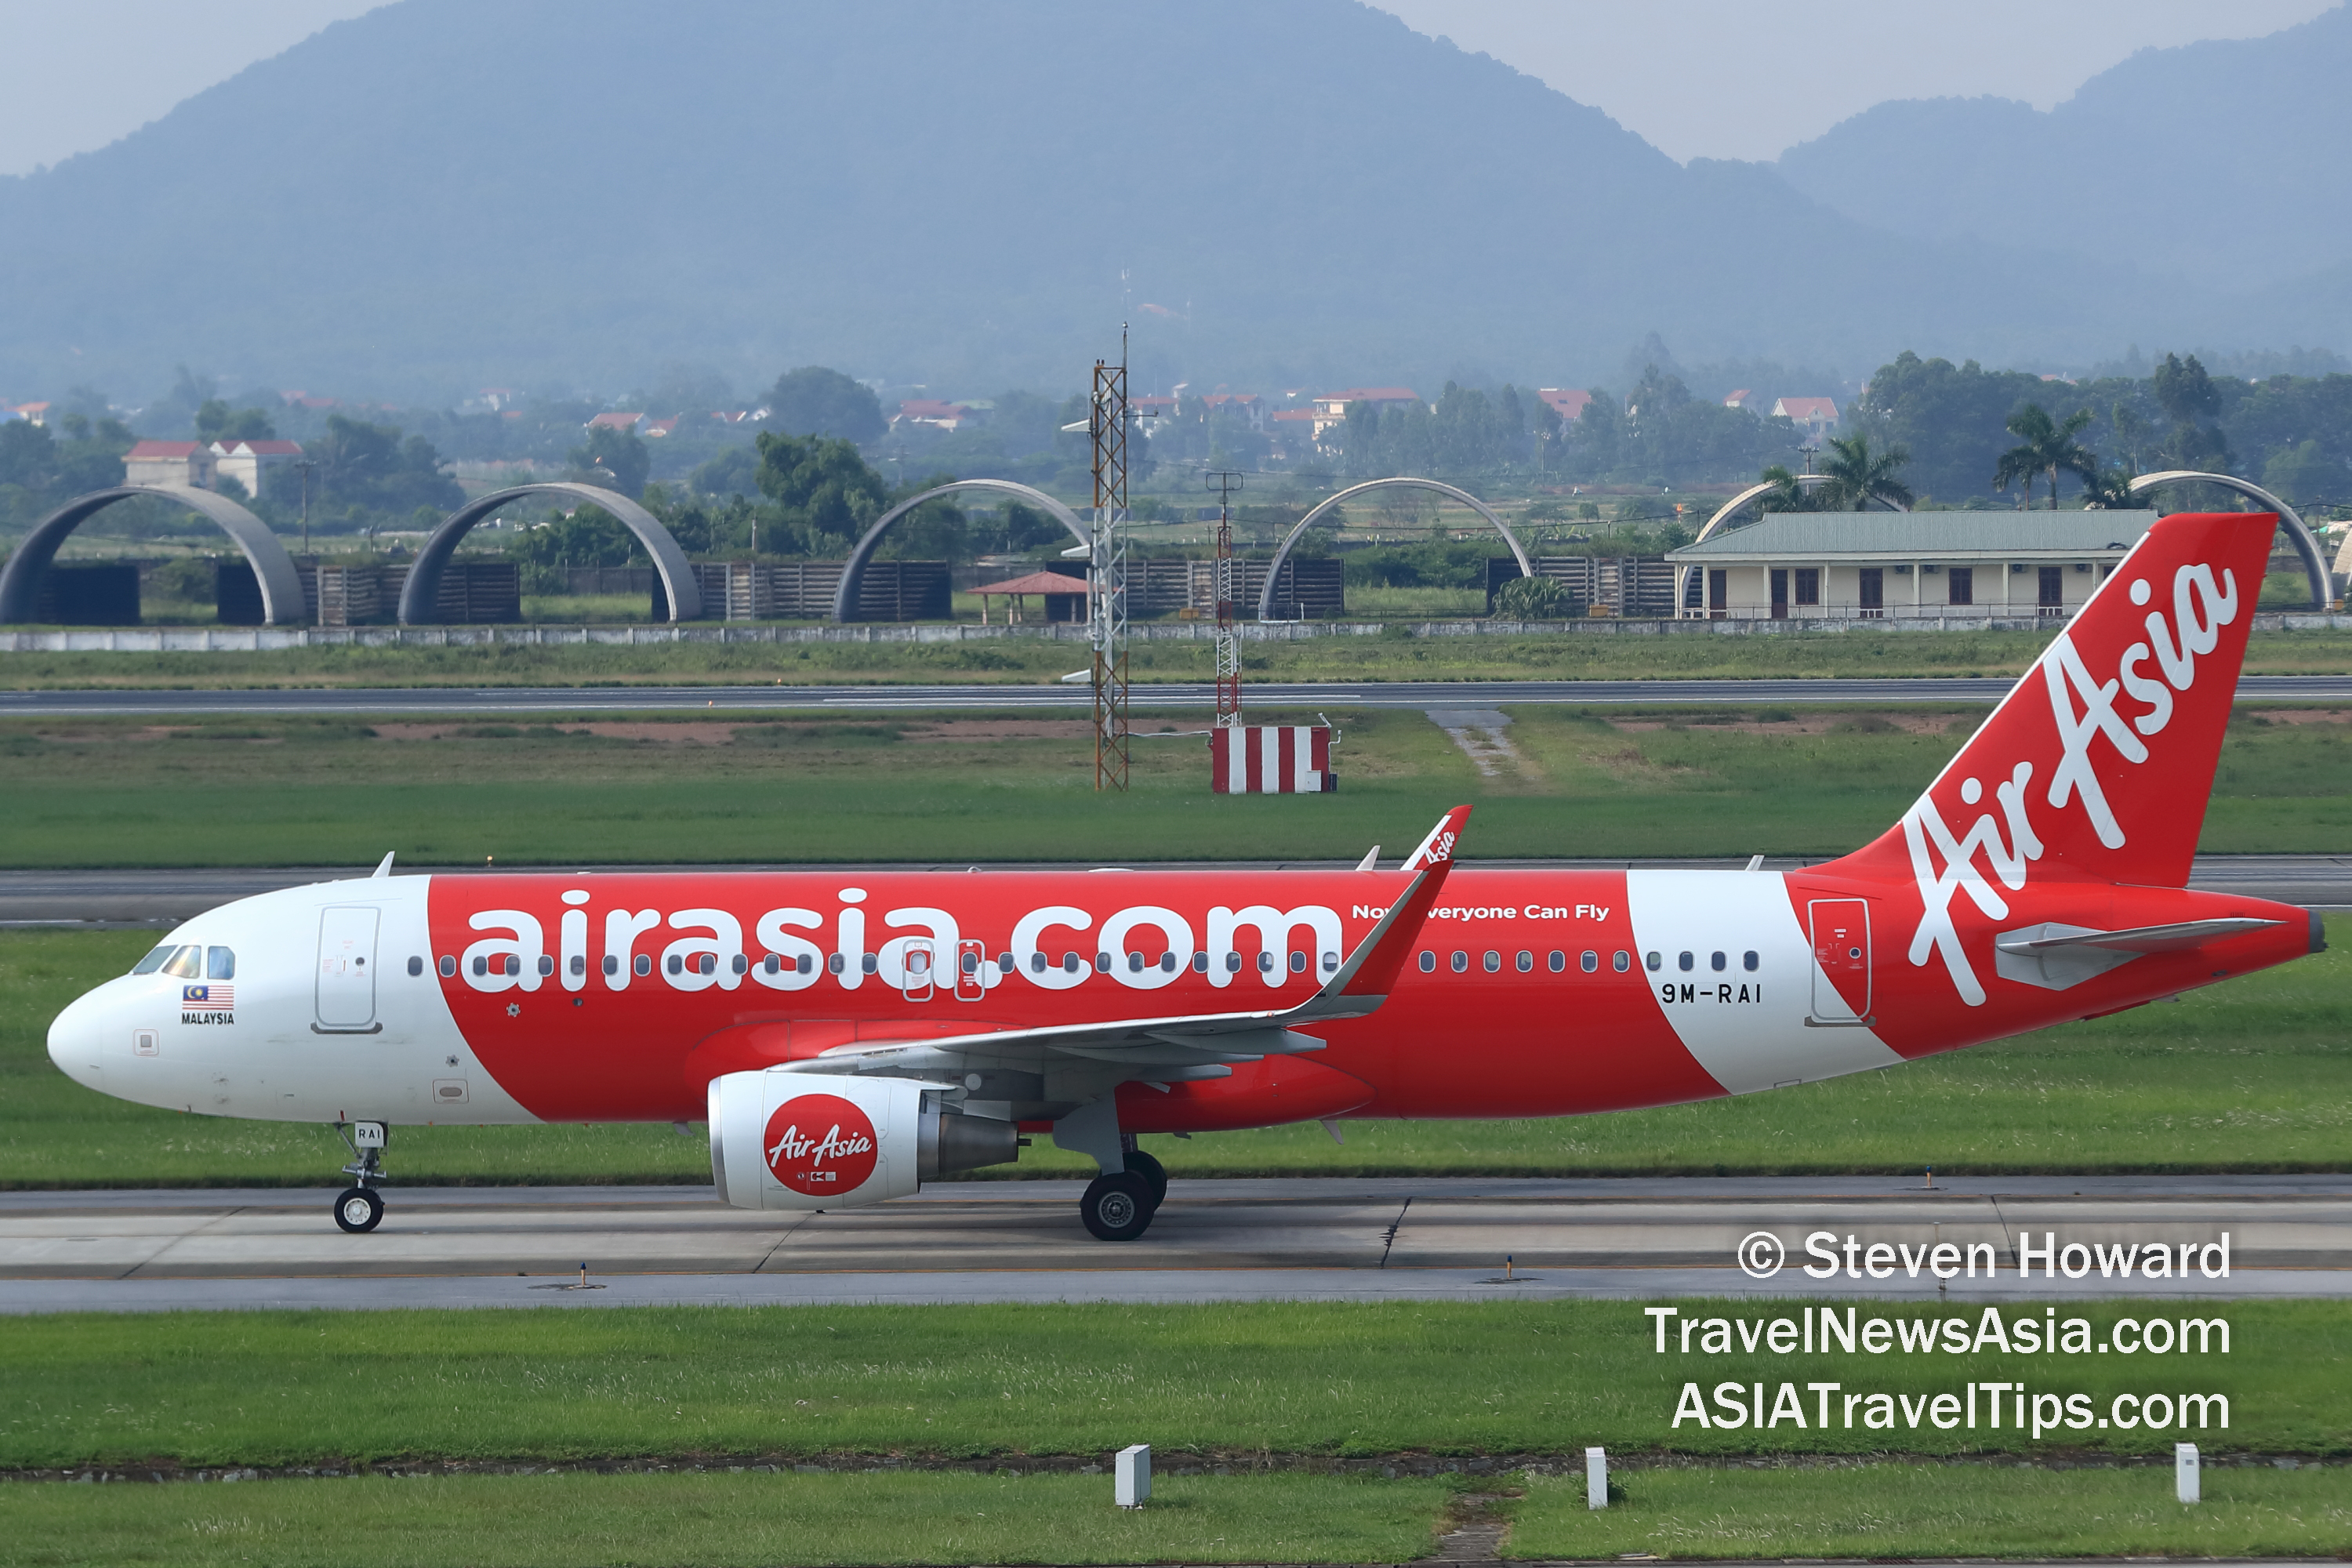 AirAsia Airbus A320 red M-RAI. Picture by Steven Howard of TravelNewsAsia.com Click to enlarge.